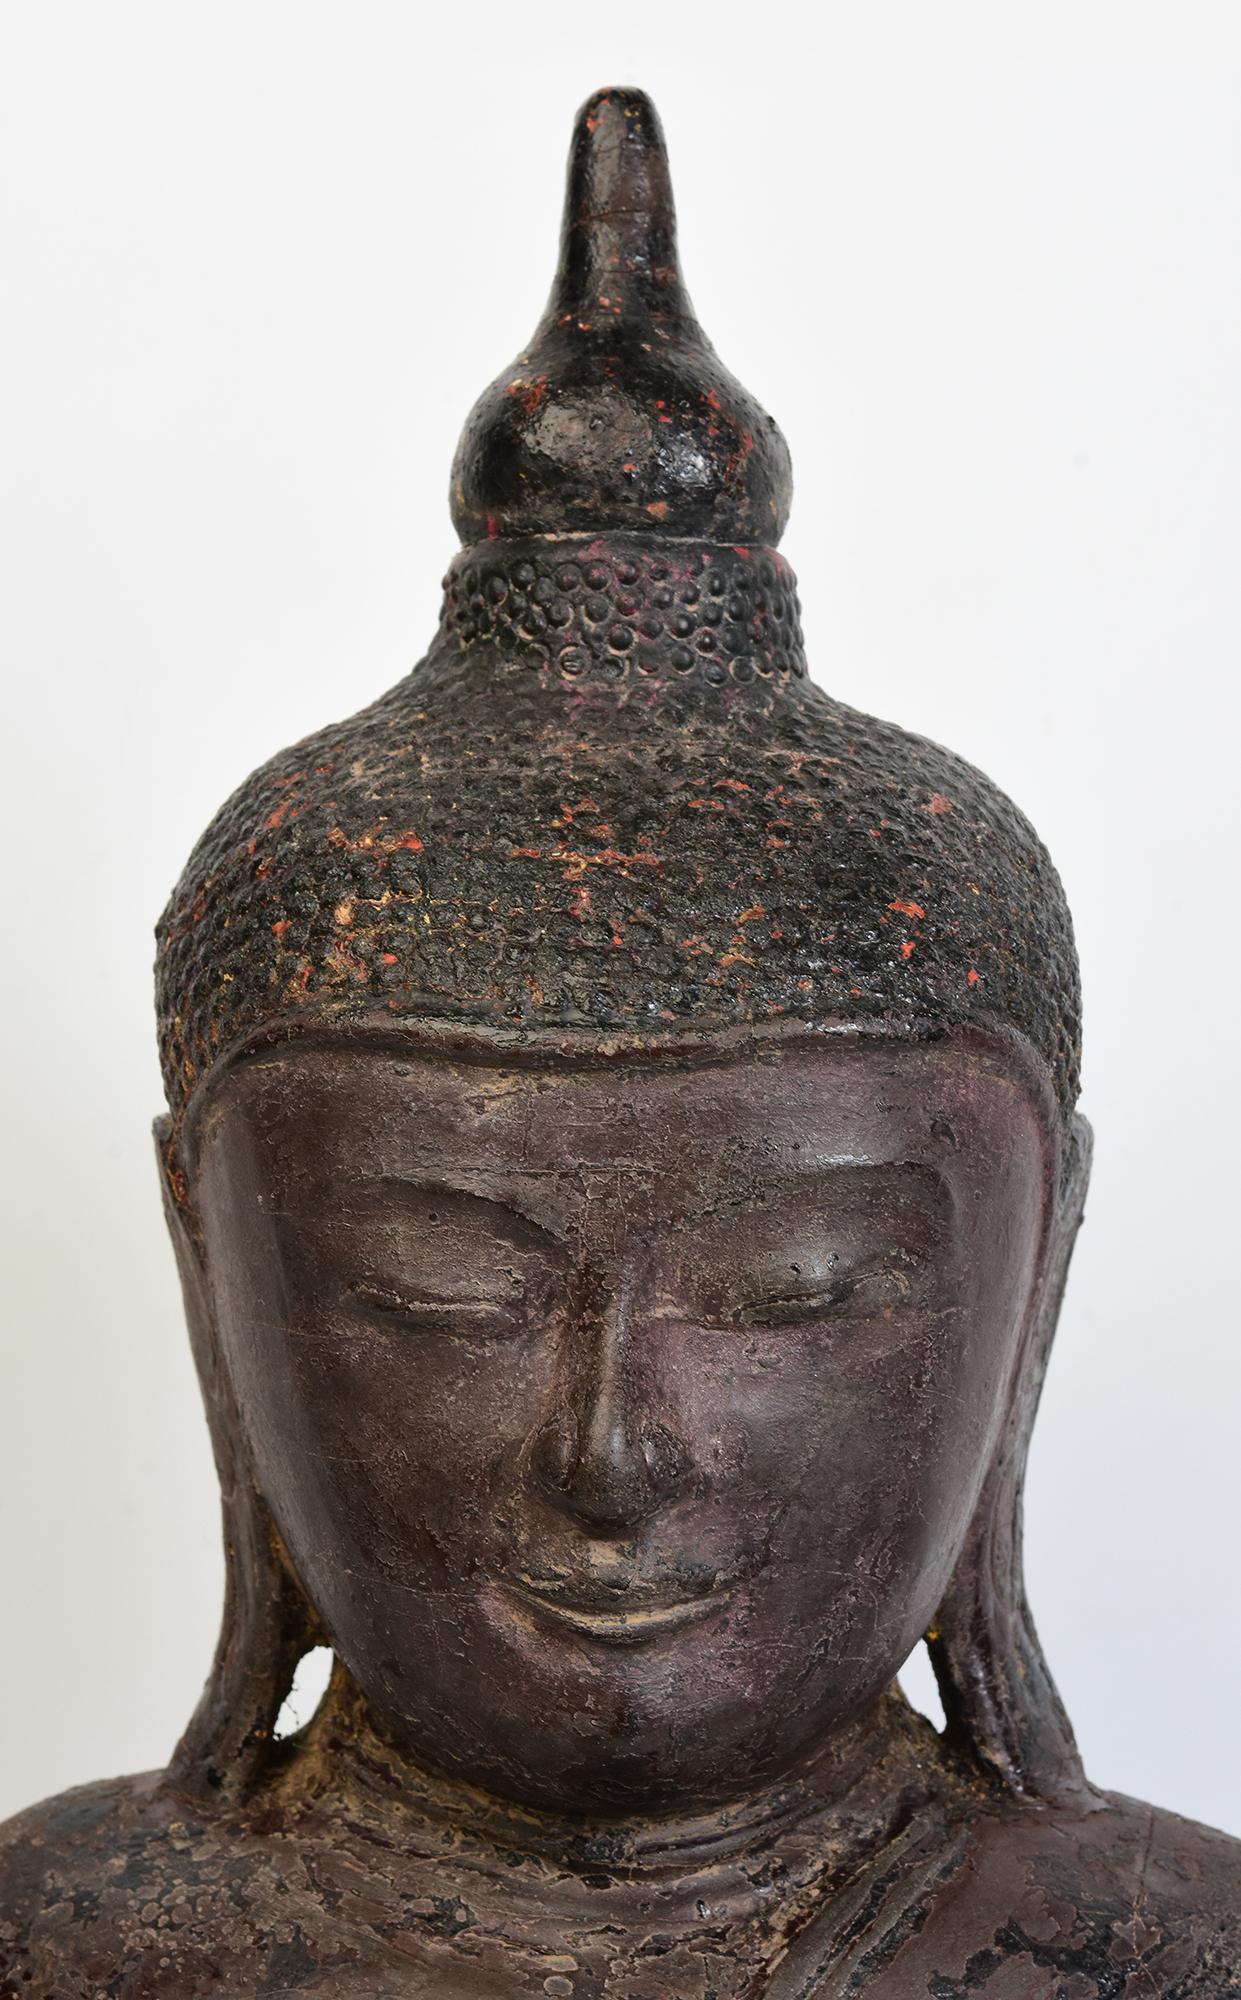 Burmese wooden Buddha sitting in Mara Vijaya (calling the earth to witness) posture on a base.

Age: Burma, Ava Period, 16th Century
Size: Height 57.4 C.M. / Width 30 C.M. / Depth 13.5 C.M.
Condition: Nice condition overall (some expected